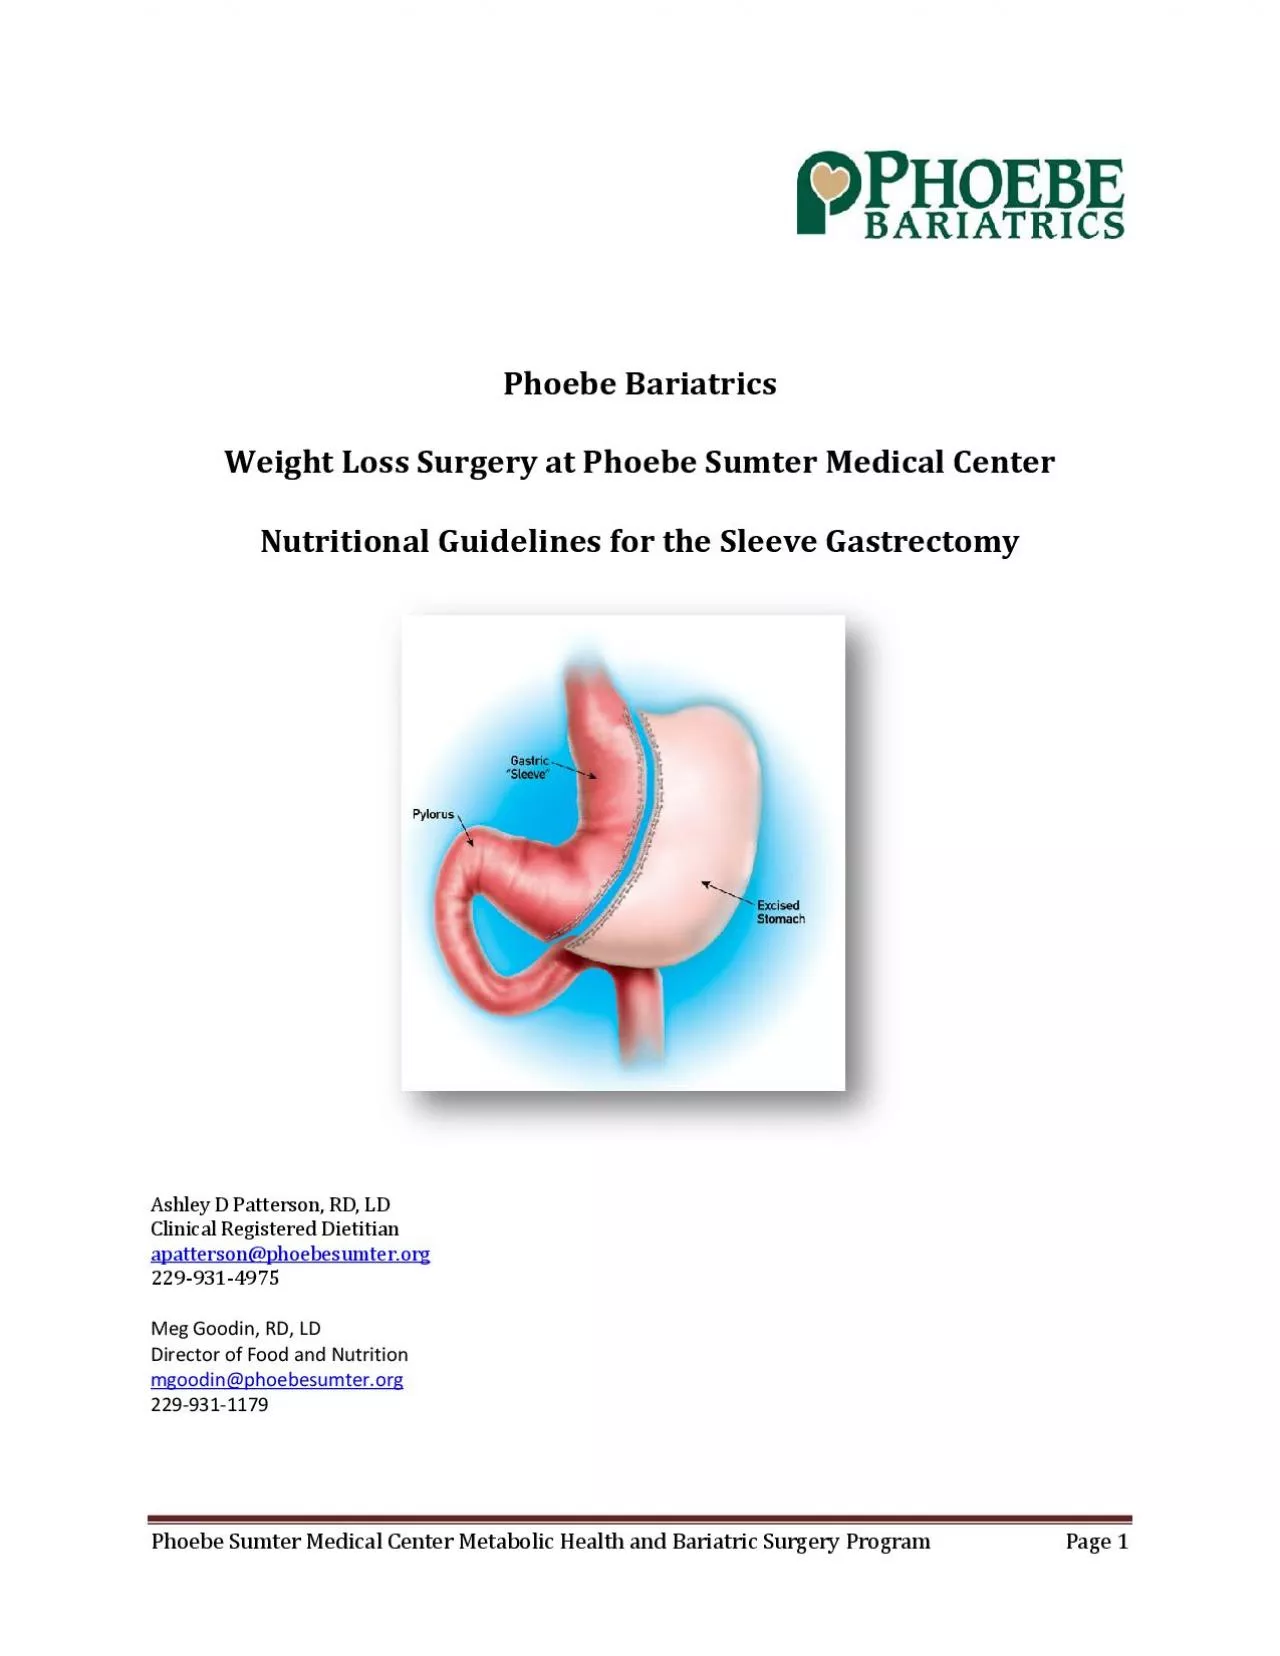 Phoebe Sumter Medical Center Metabolic Health and Bariatric Surgery Pr